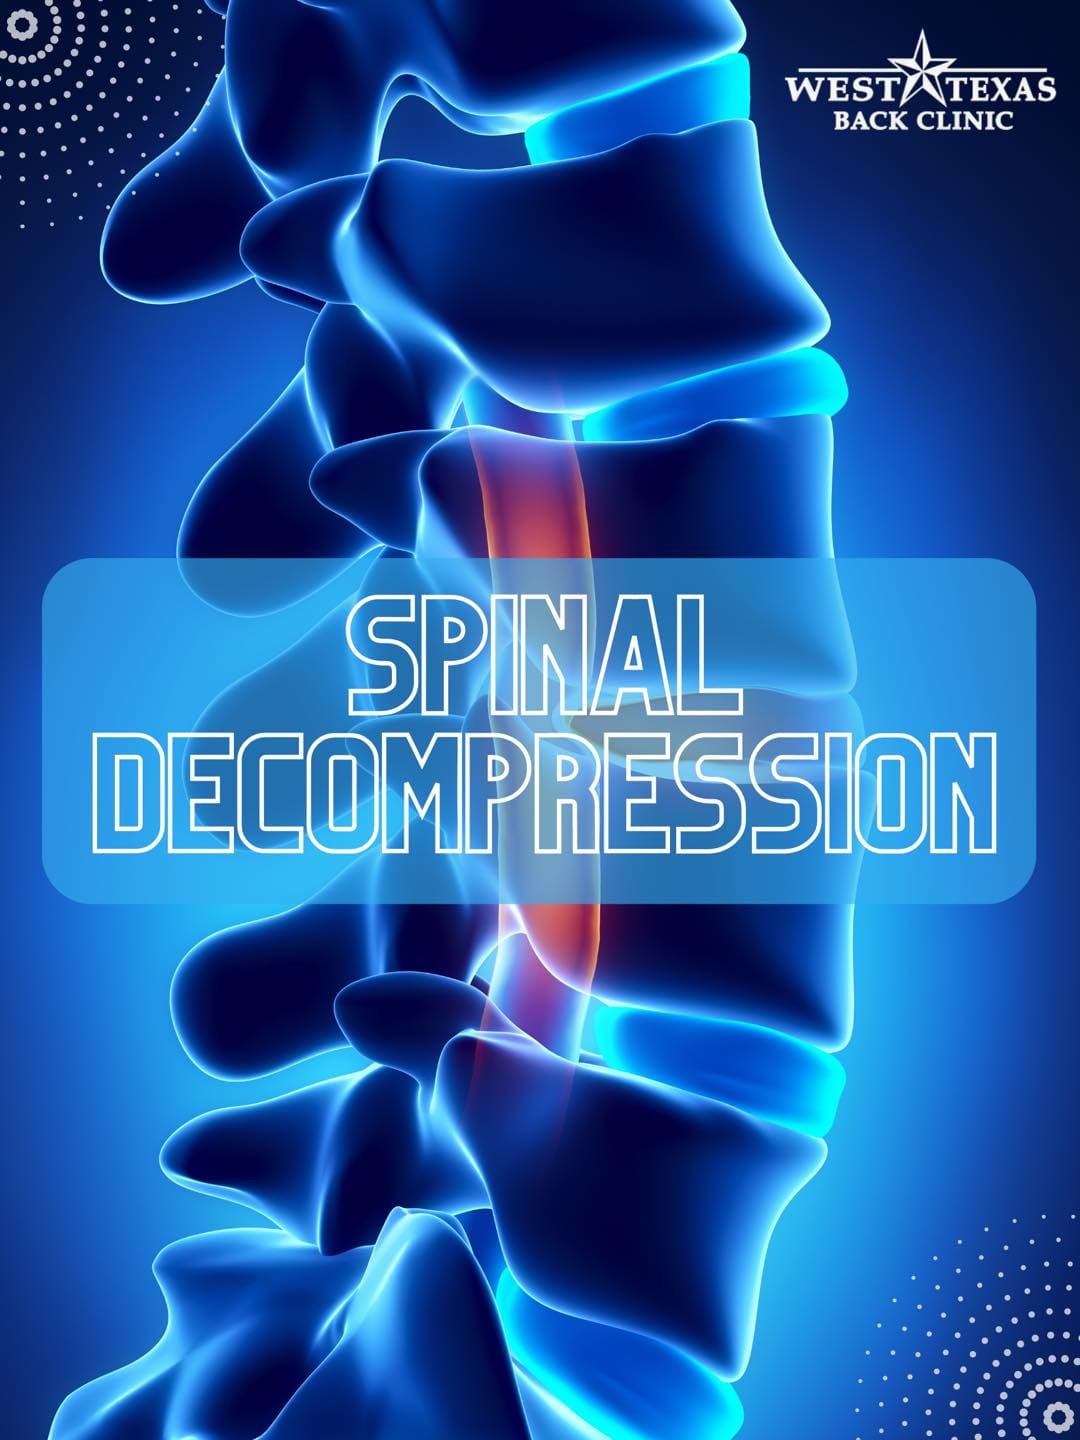 Spinal compression graphic by West Texas Back Clinic